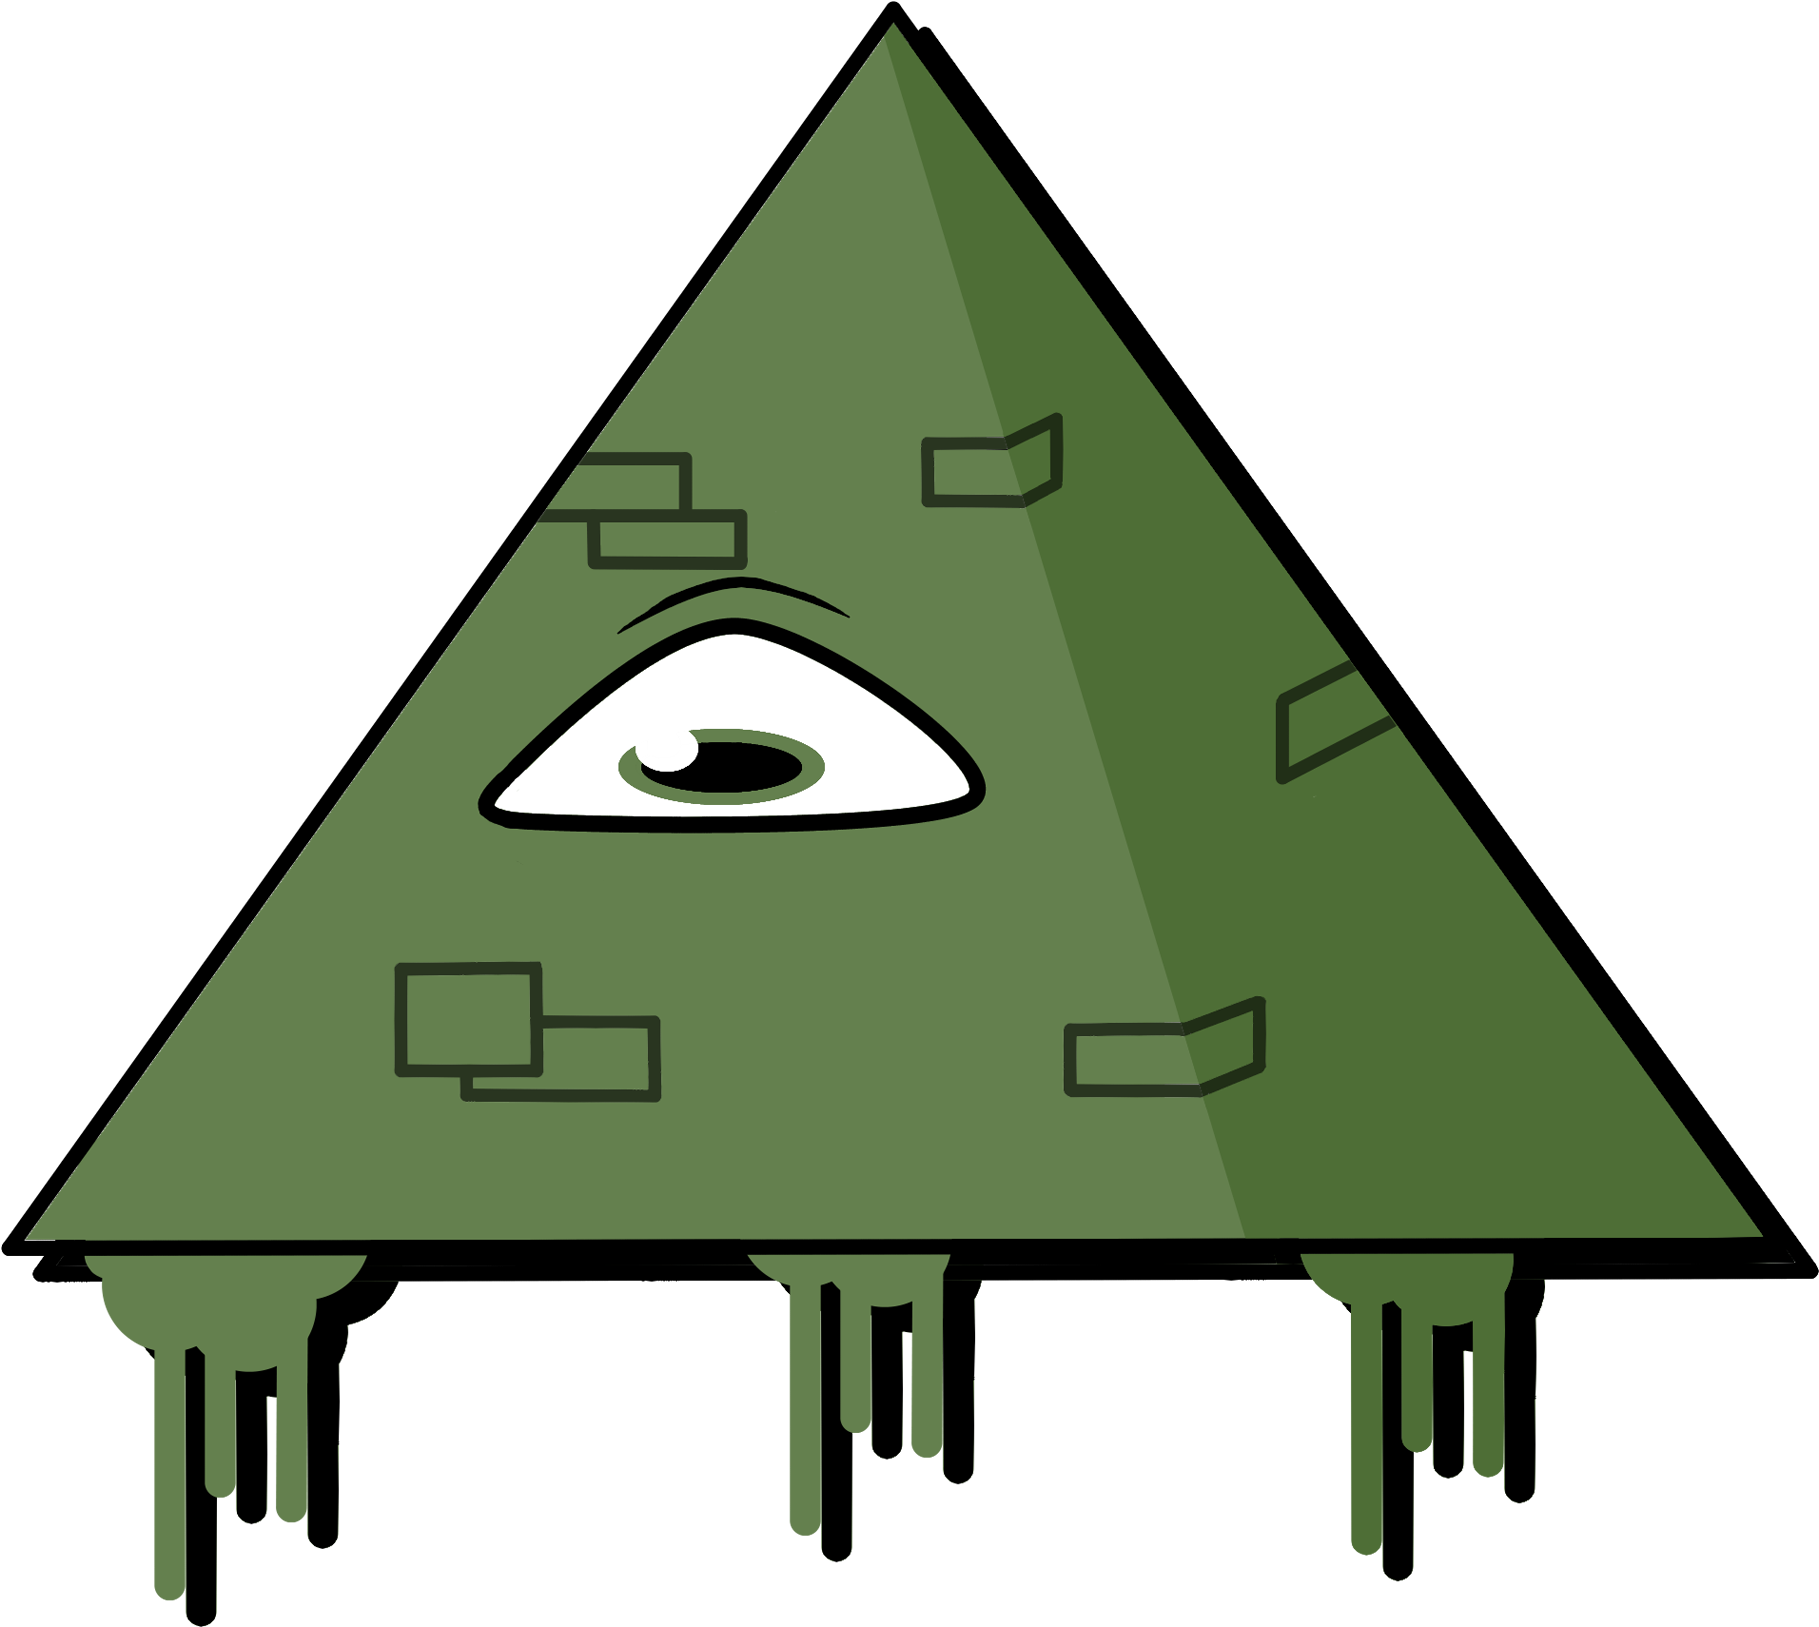 Green Triangle With Eye Illustration